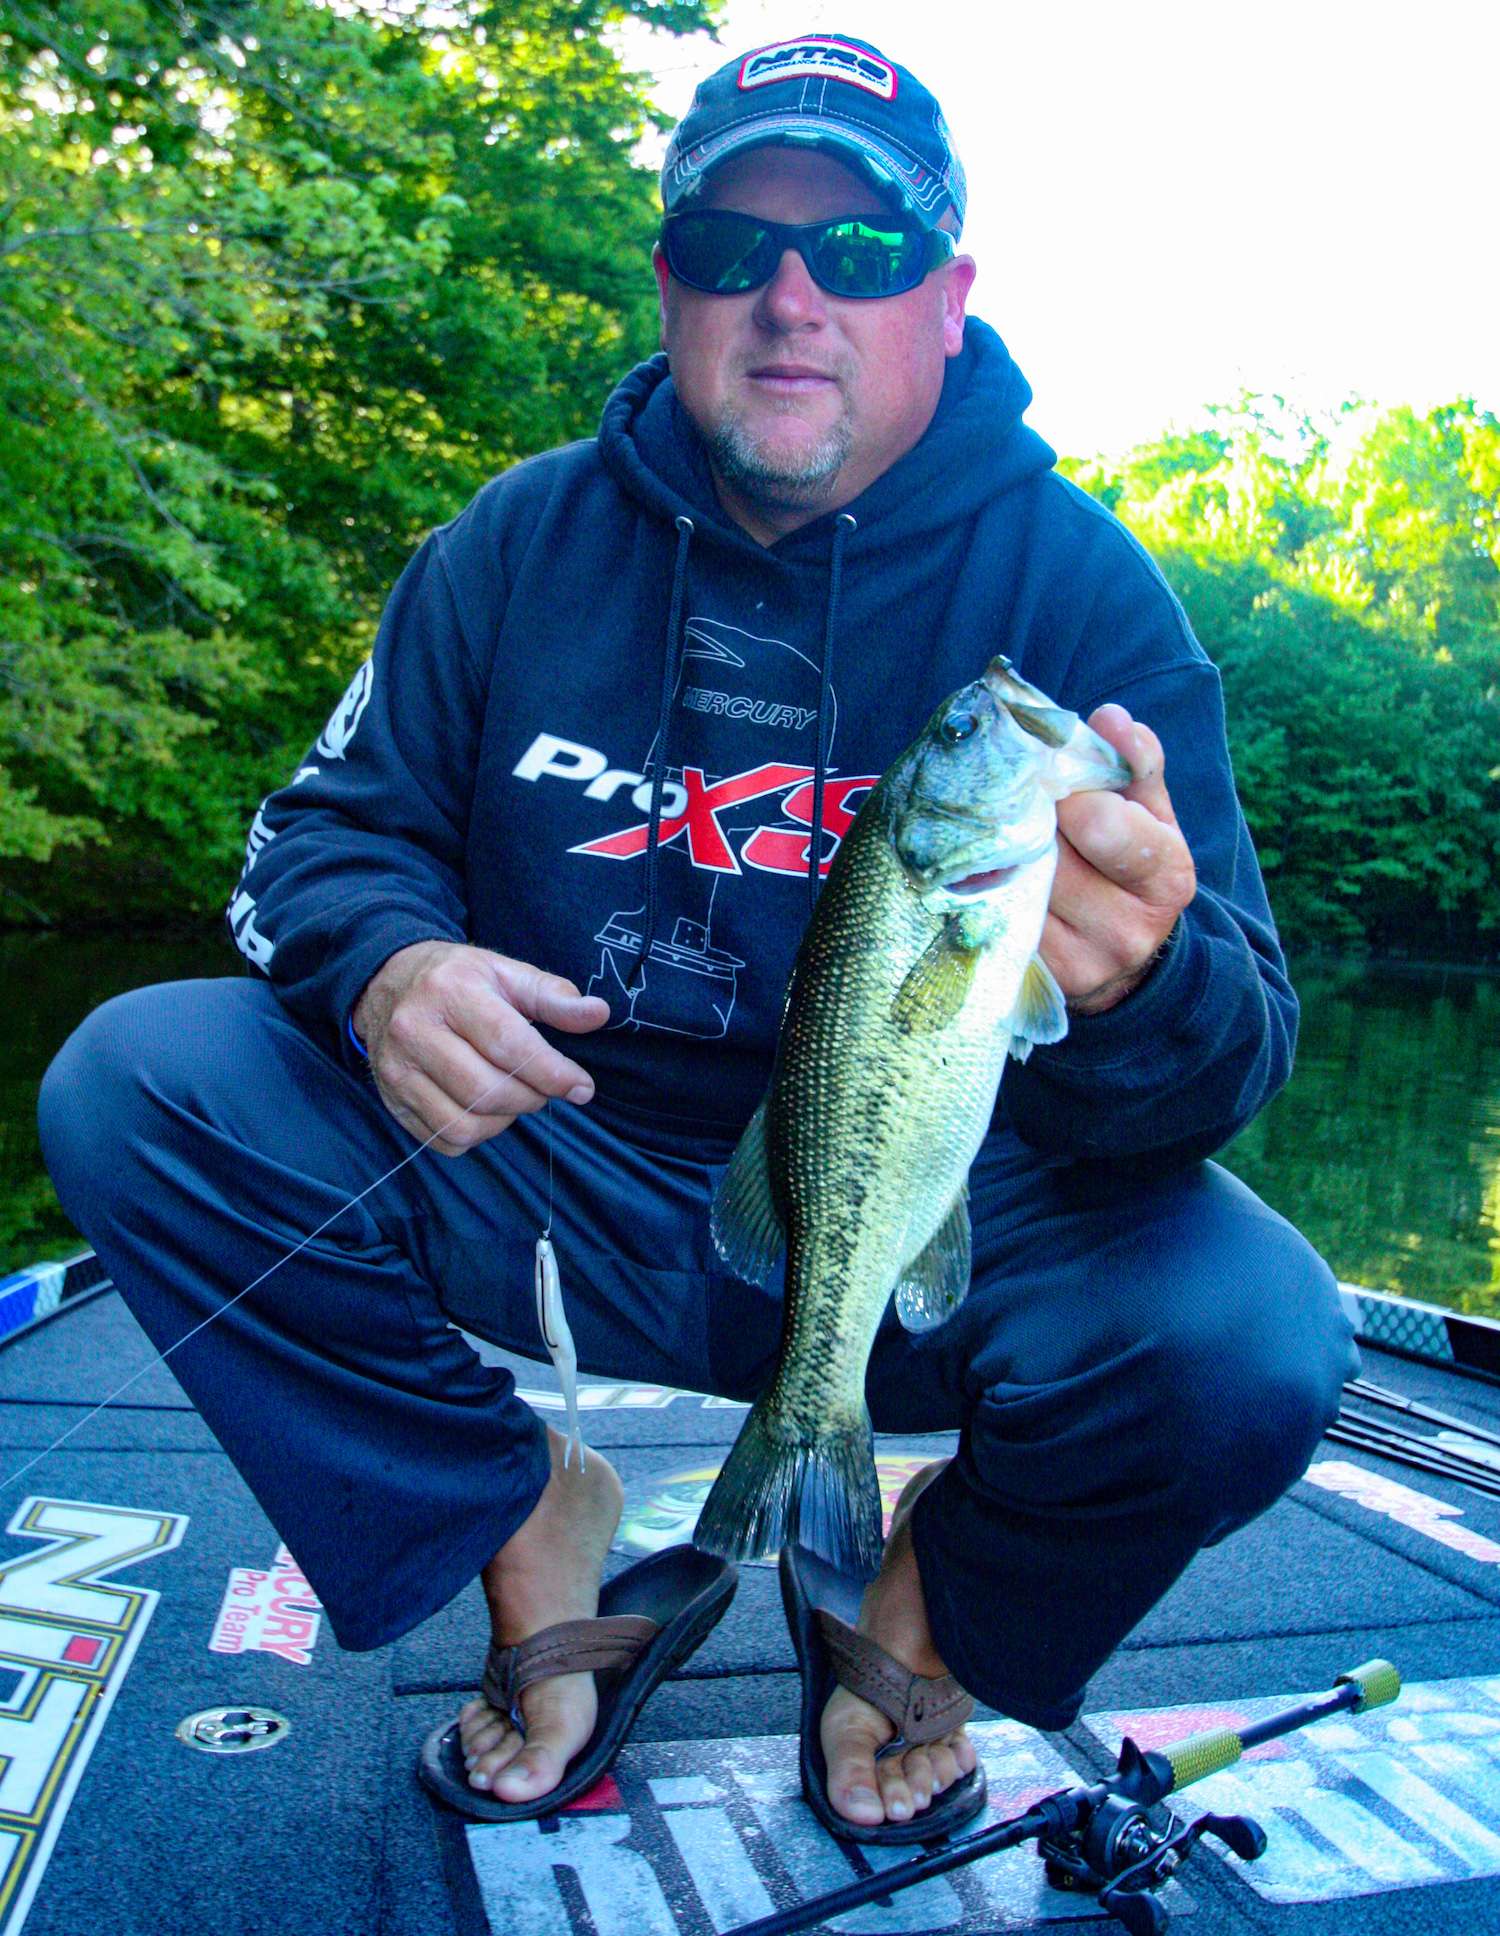 <b>8:13 a.m.</b> The creature fails to entice another fish on the dam, so Hartman switches to a pearl white Zoom Super Fluke rigged weightless with a 4/0 offset worm hook. He casts it to the bank and bags his first keeper largemouth of the day, 1 pound, 3 ounces. âI like the Fluke in calm, clear conditions. If it were windy, Iâd go with a jerkbait.â <br>
<b>8:17 a.m.</b> Pressing deeper into the cove, Hartman spots a 2-pound bass on a bed and drops his Power-Poles. âIn sight fishing, stealth is everything. Power-Poles keep your boat locked down a safe distance from the fish. Without them, you have to constantly adjust your boat position with the trolling motor, which can kick up silt and spook the bass.â He flips the brush hog onto the nest, but the fish doesnât react. âIâll make multiple presentations to different parts of the nest and watch how the fish reacts. Thereâs usually one little âsweet spotâ where an intruding lure gets the fish riled up.â <br>
<b>8:22 a.m.</b> Hartman leaves the bedding fish, vowing to check back later. He continues around the cove with the Fluke. <br>
<b>8:28 a.m.</b> As Hartman approaches a steep bank, he sees a 4-pound bass swim over the top of a submerged log. âThat fish has probably got a bed nearby.â He flips the brush hog around the blowdown. âIâm not seeing a bed yet. Iâll hit this spot again when the sun gets higher.â
